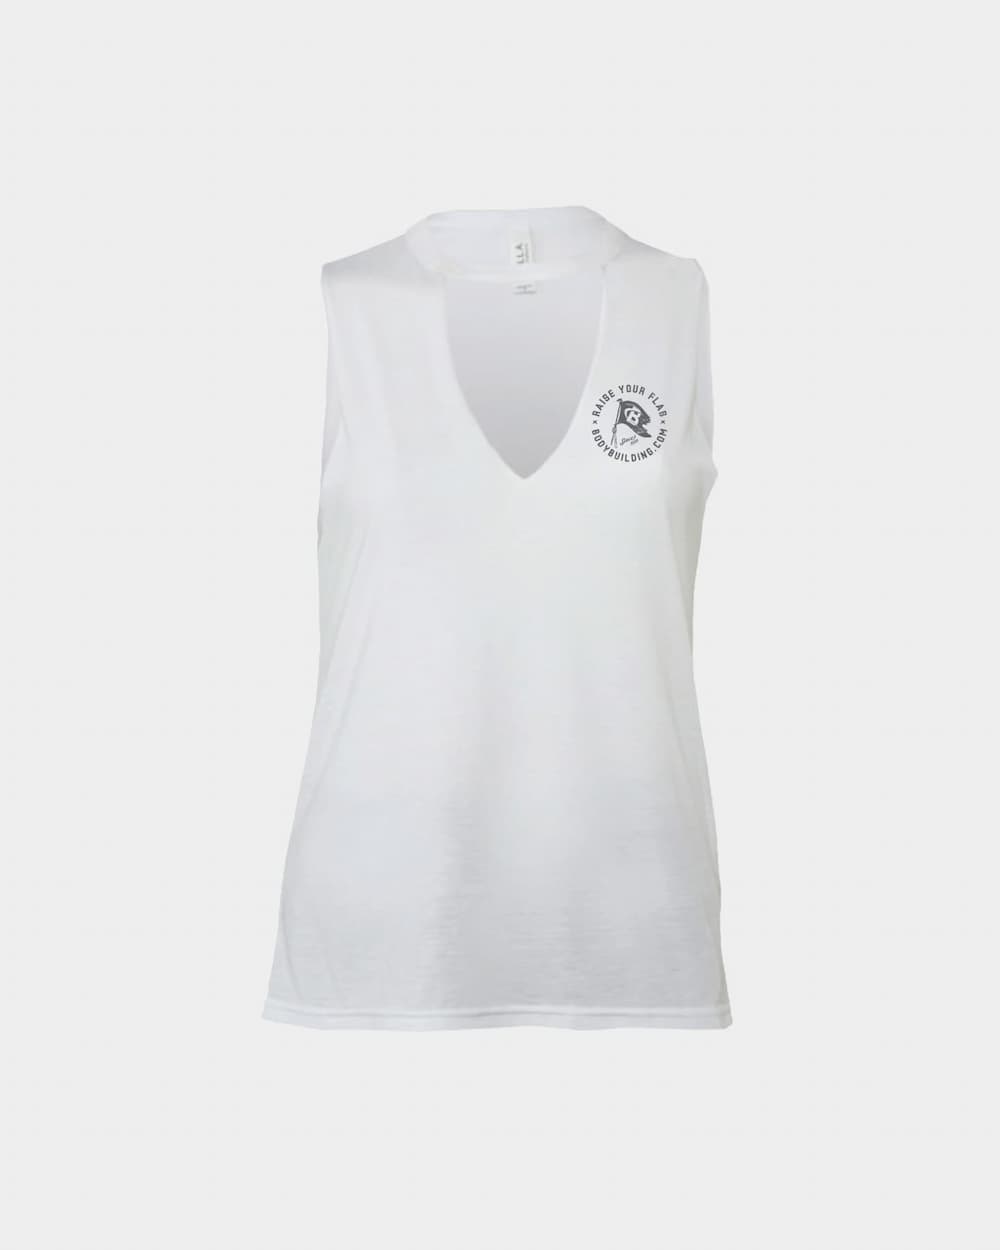 BBCOM-Raise-Your-Flag-Tank-ghost-Crop-White-Front-grey-M